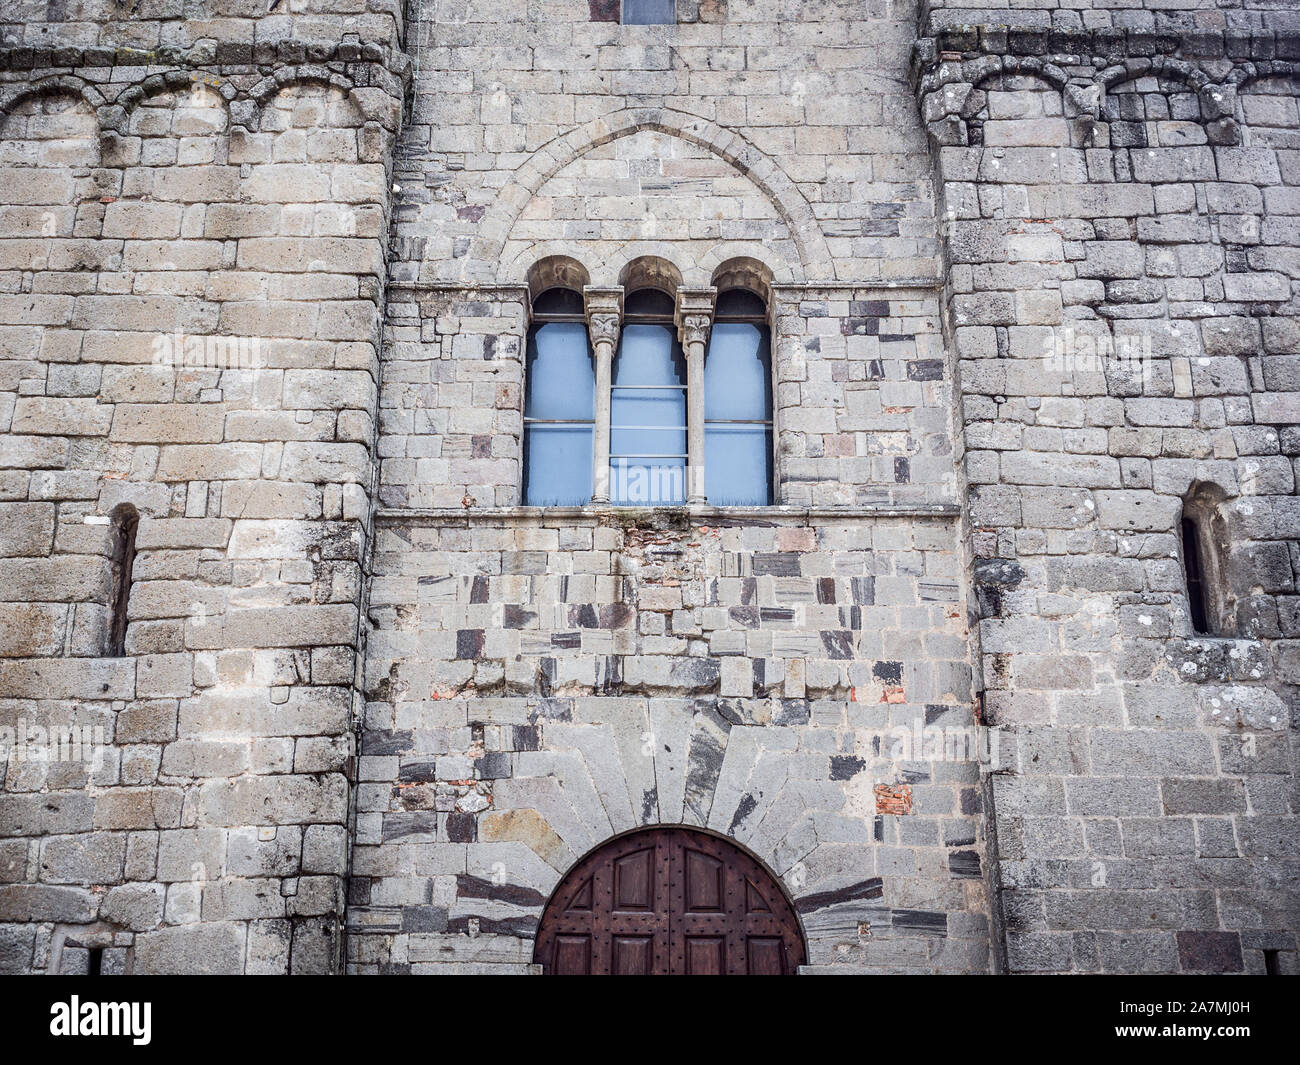 Triple lancet window of Italian medieval cathedral. Stock Photo